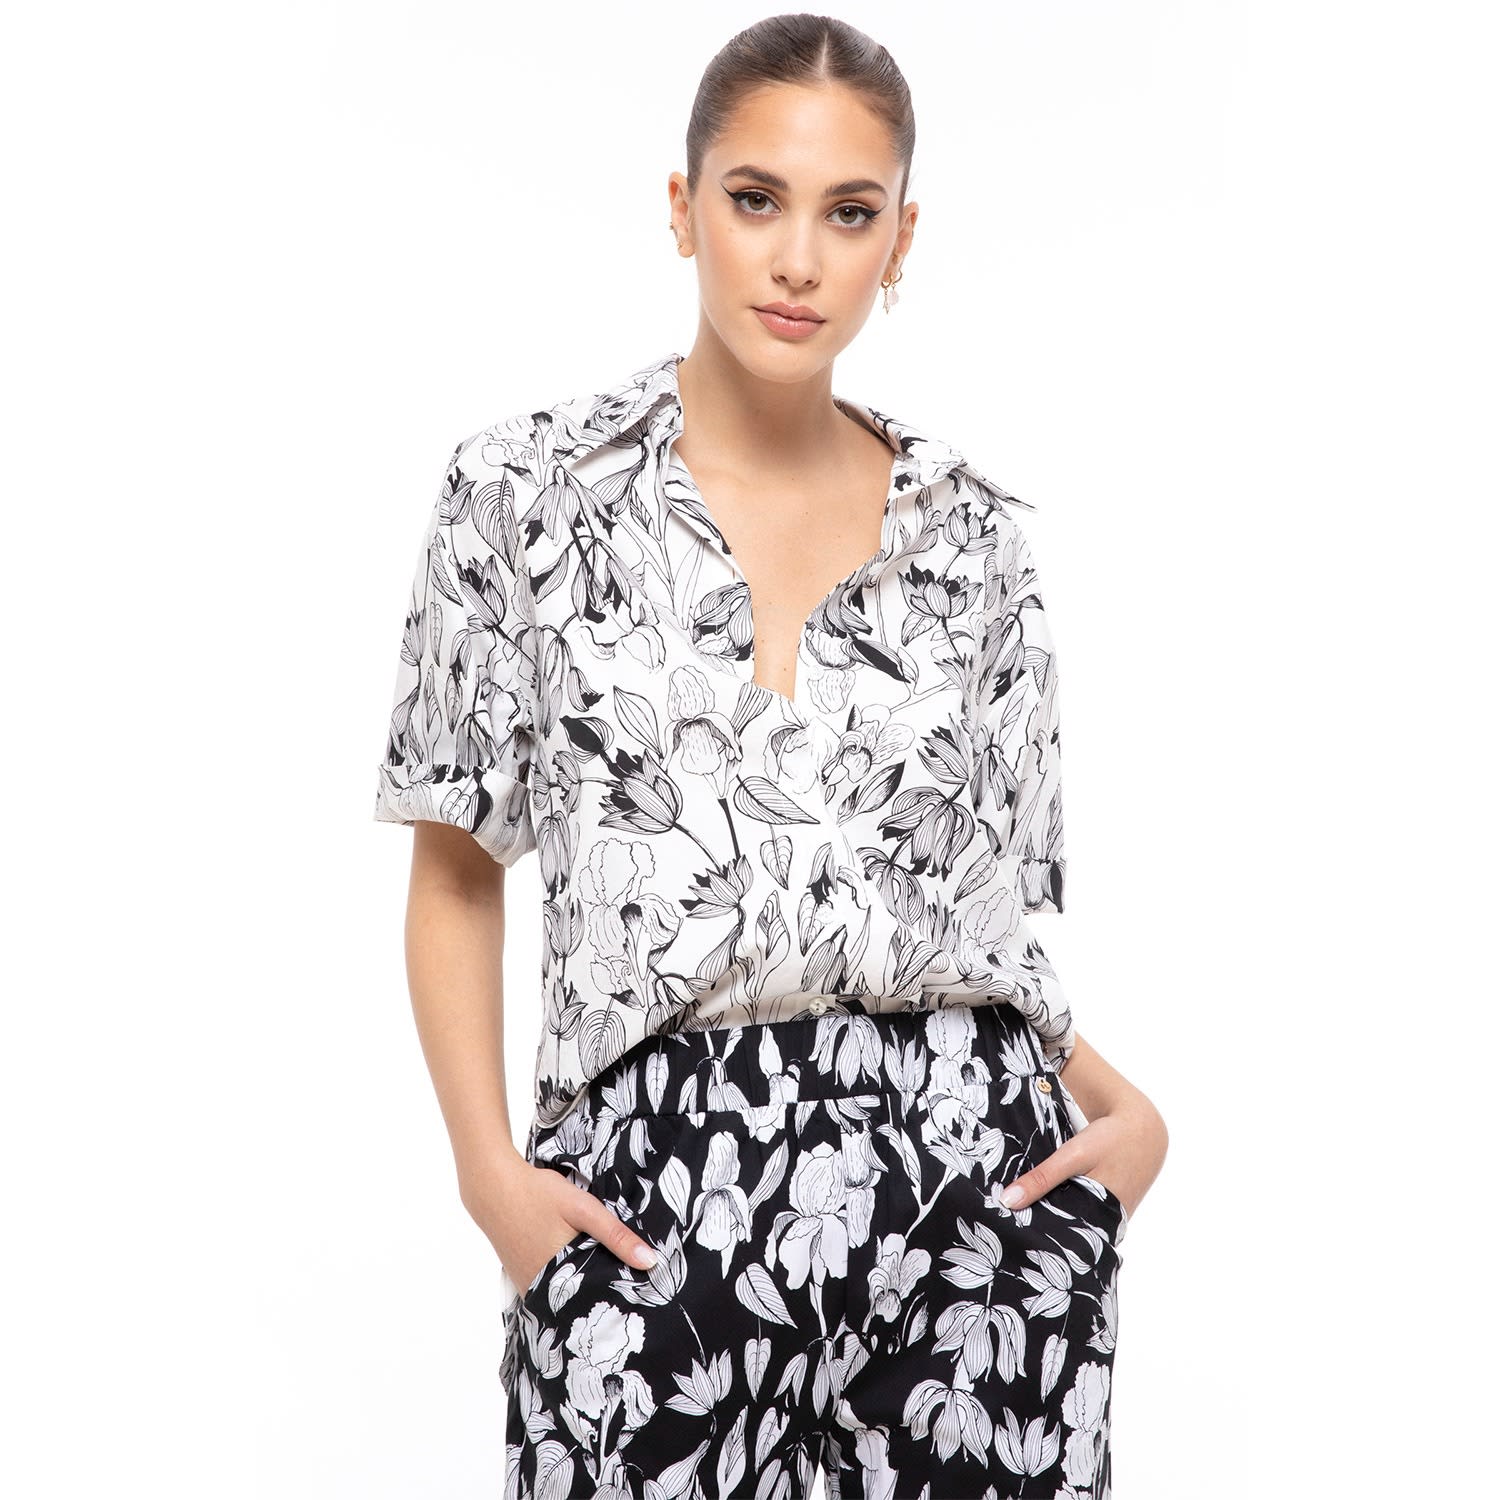 Poplin shirt with all-over floral print